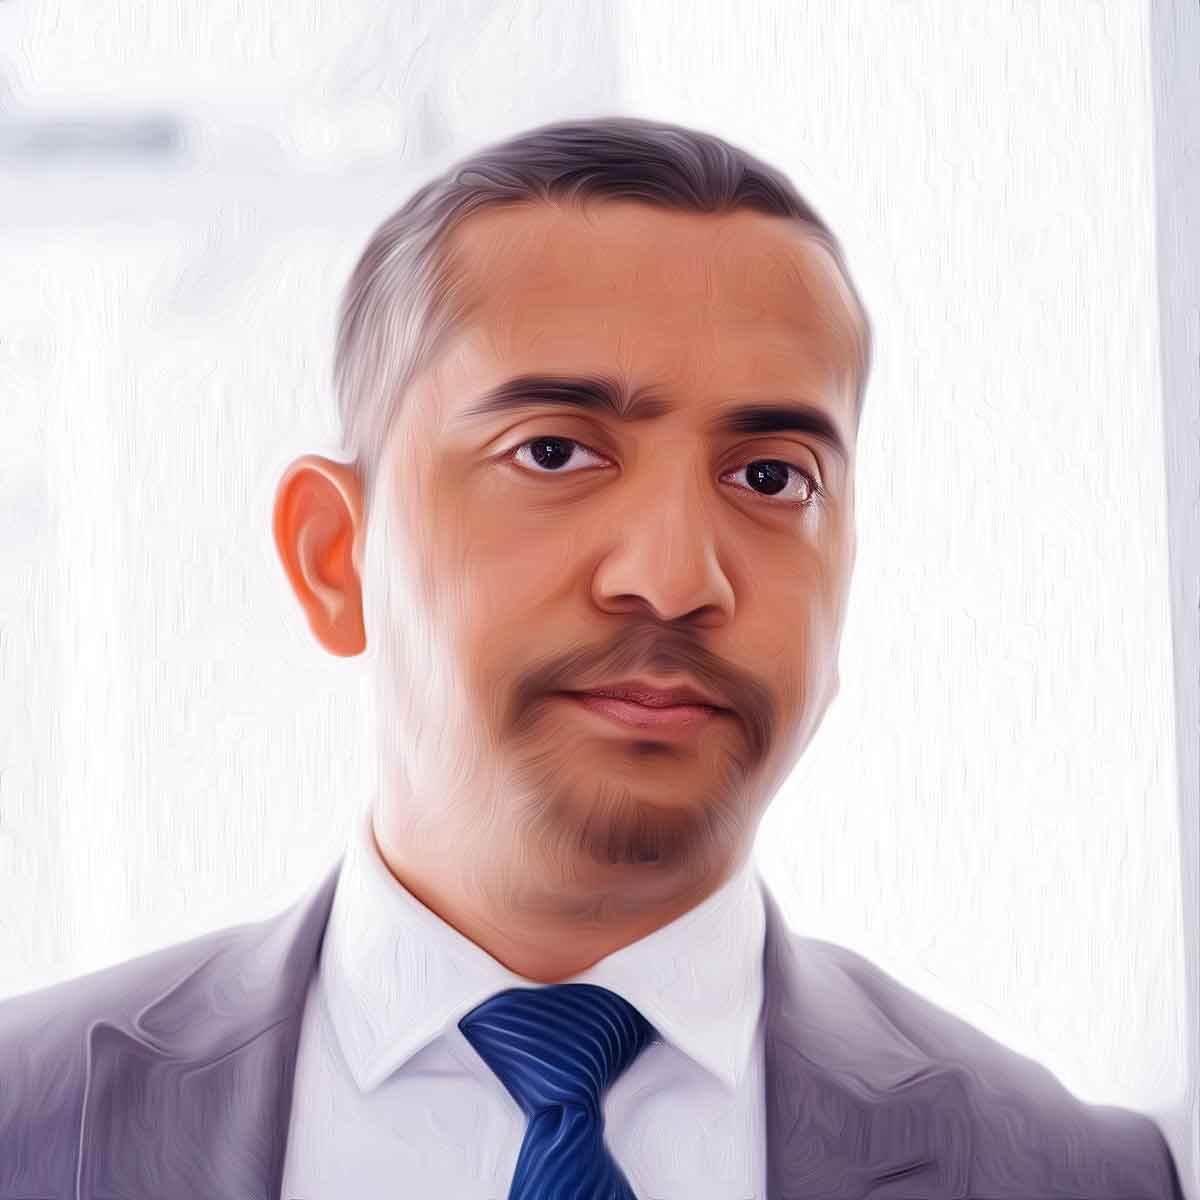 Mehdi Hasan: " I did a deep-dive into India under Modi & new warnings of an anti-Muslim genocide”